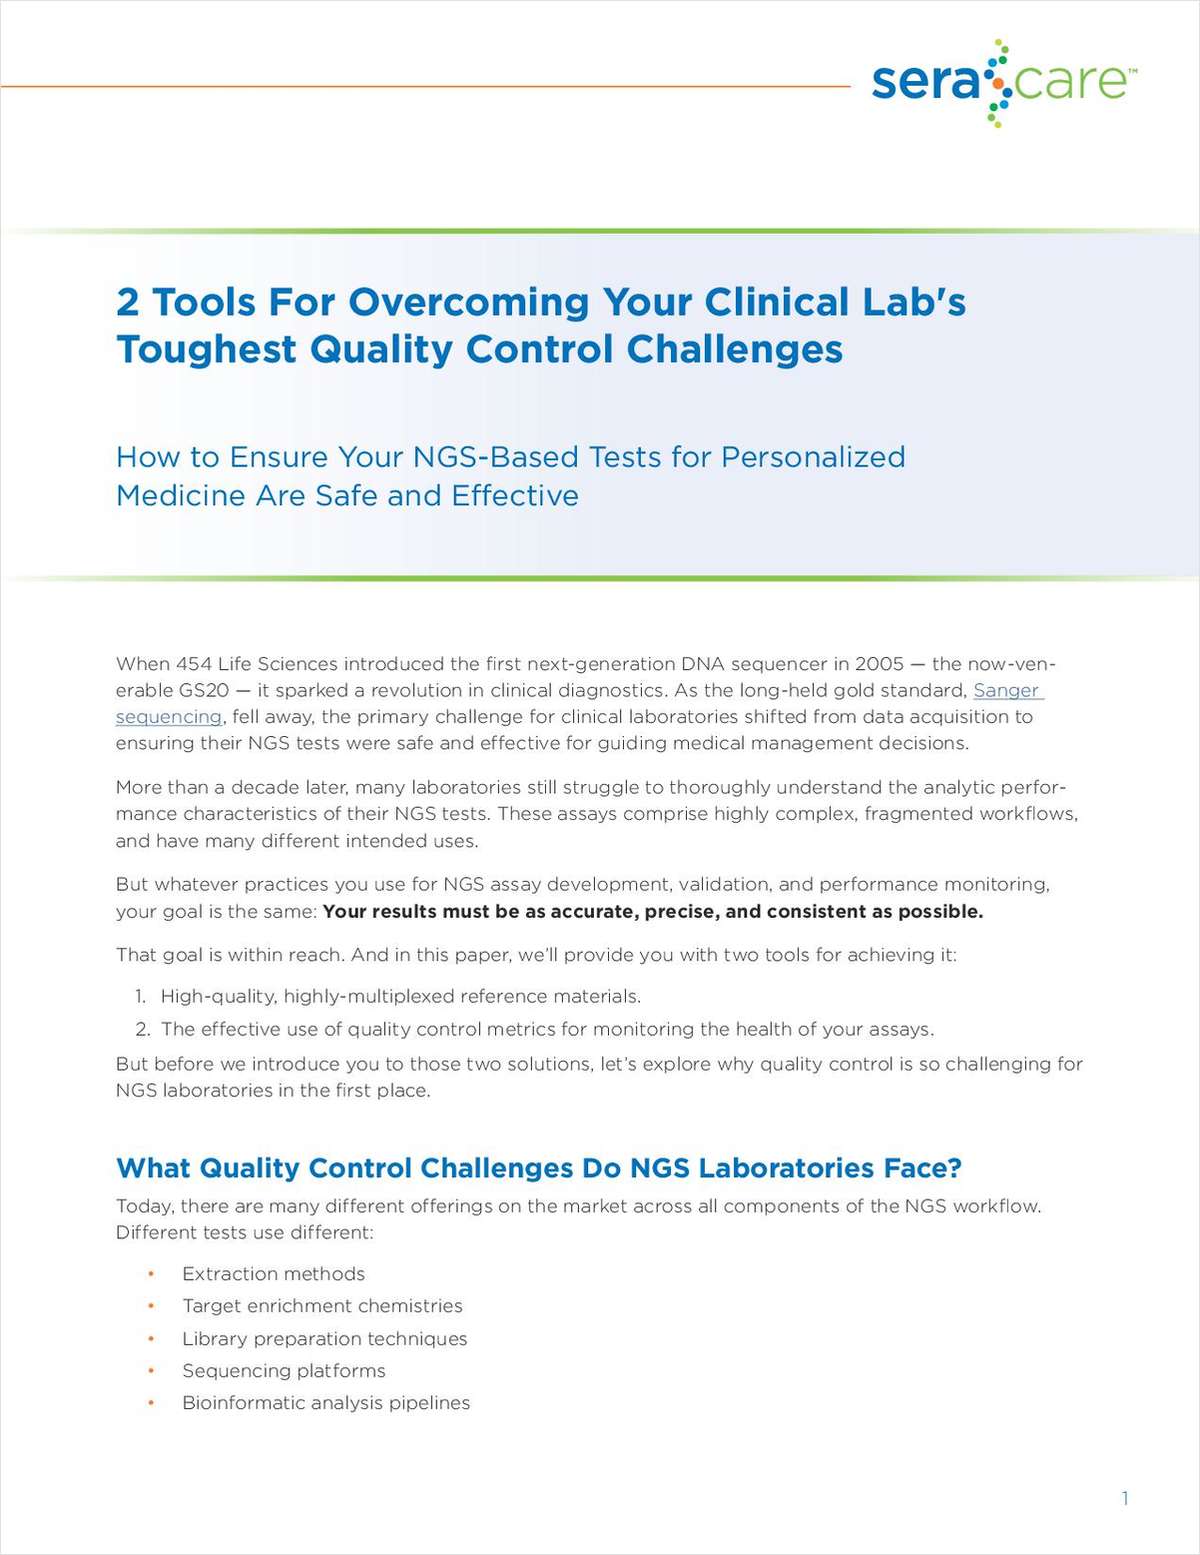 2 Tools for Overcoming Your Clinical Lab's Toughest Quality Control Challenges